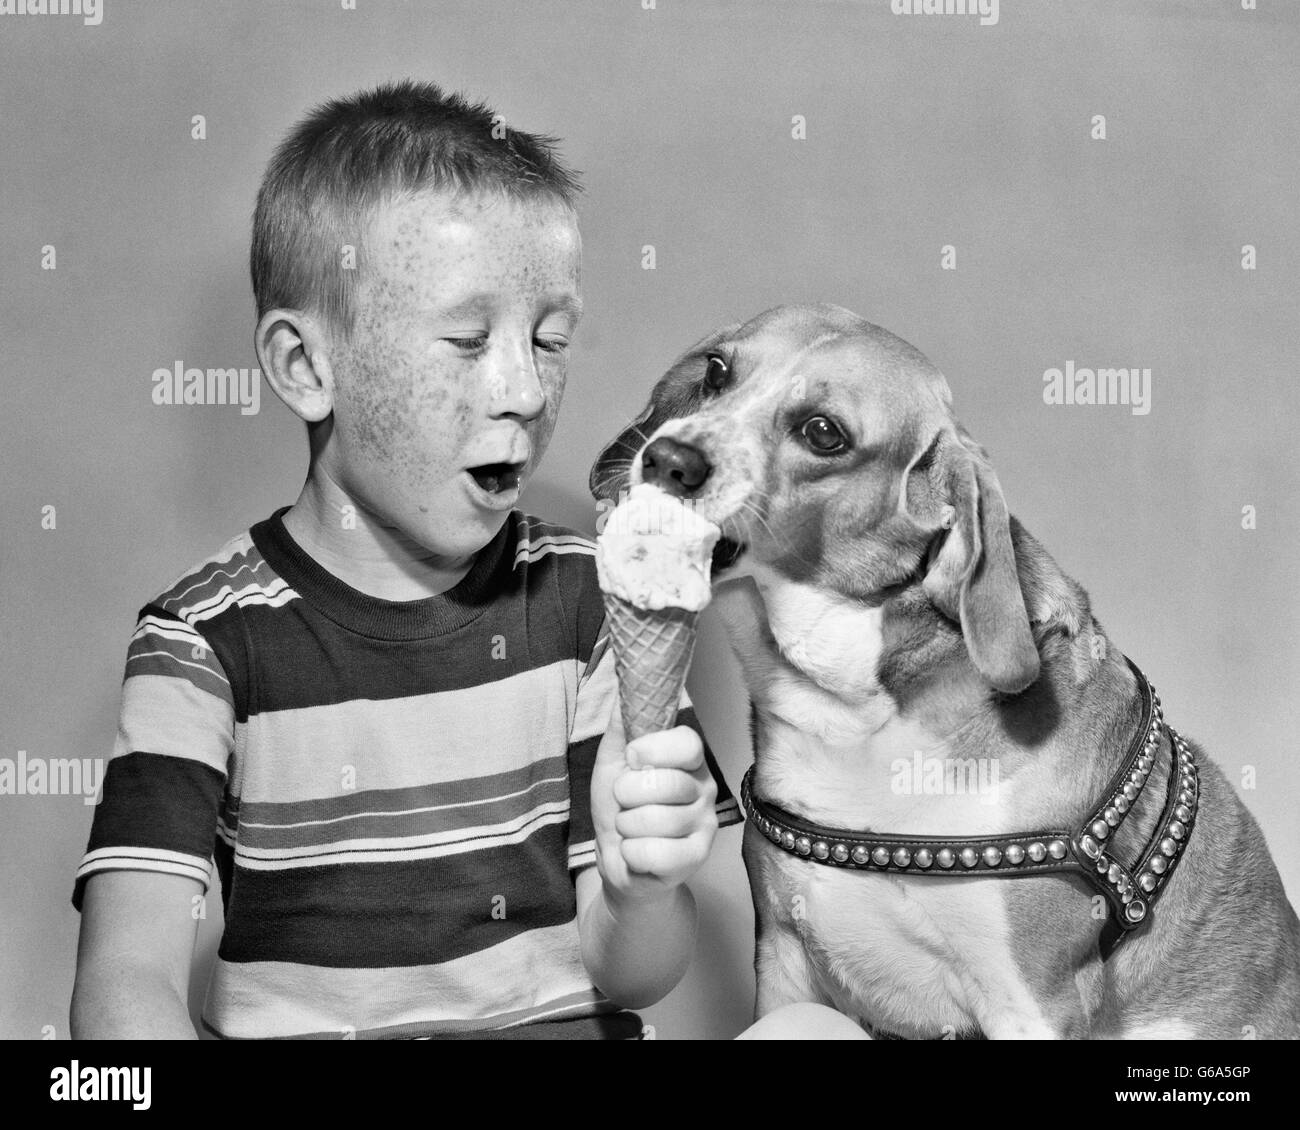 1950s FRECKLE FACE BOY SHARING ICE CREAM CONE WITH PET DOG Stock Photo